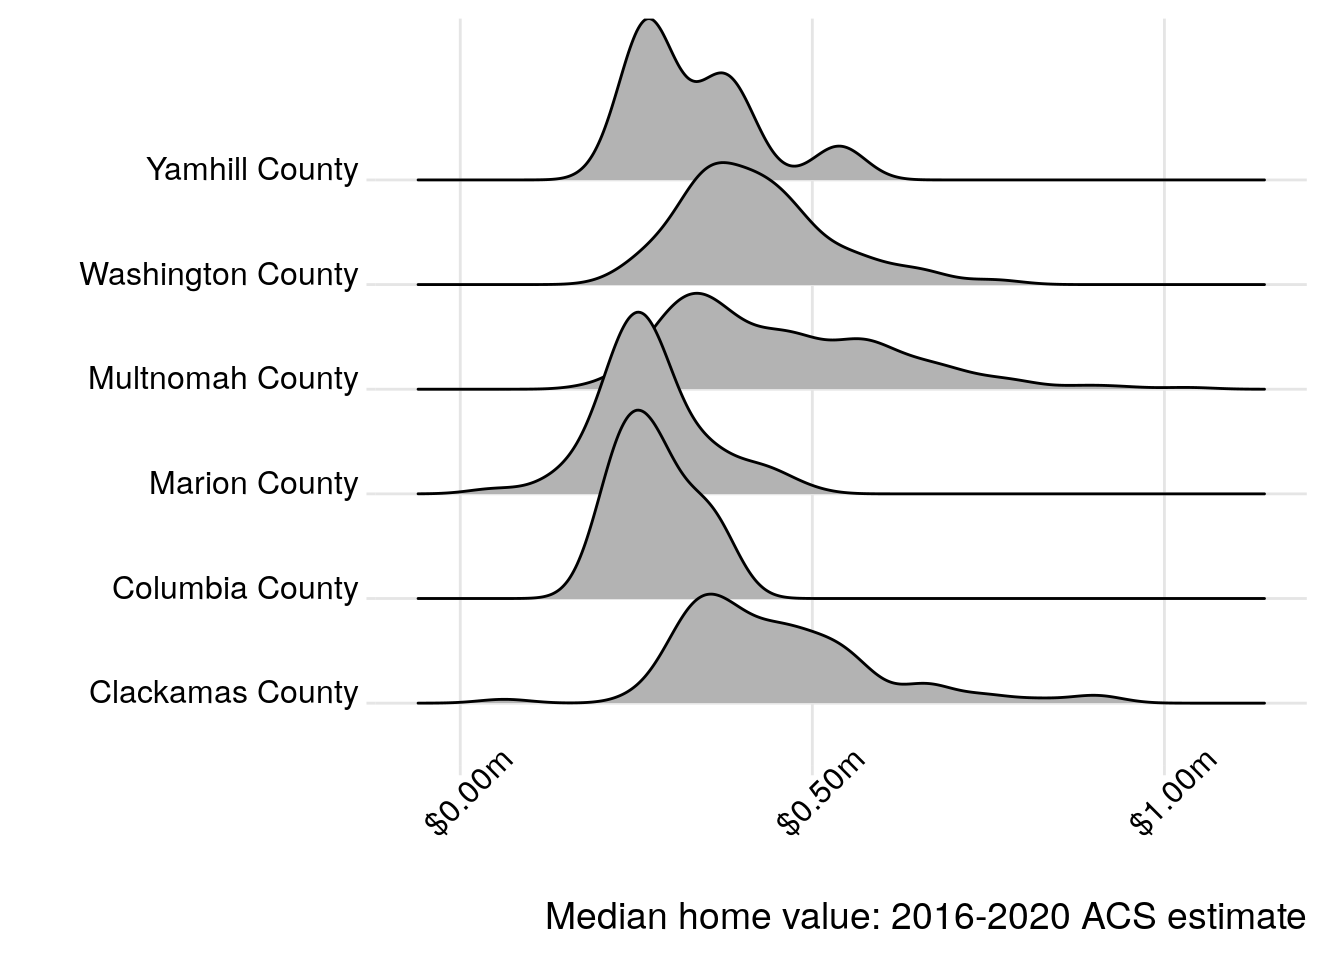 Median home values in Portland-area counties visualized with ggridges